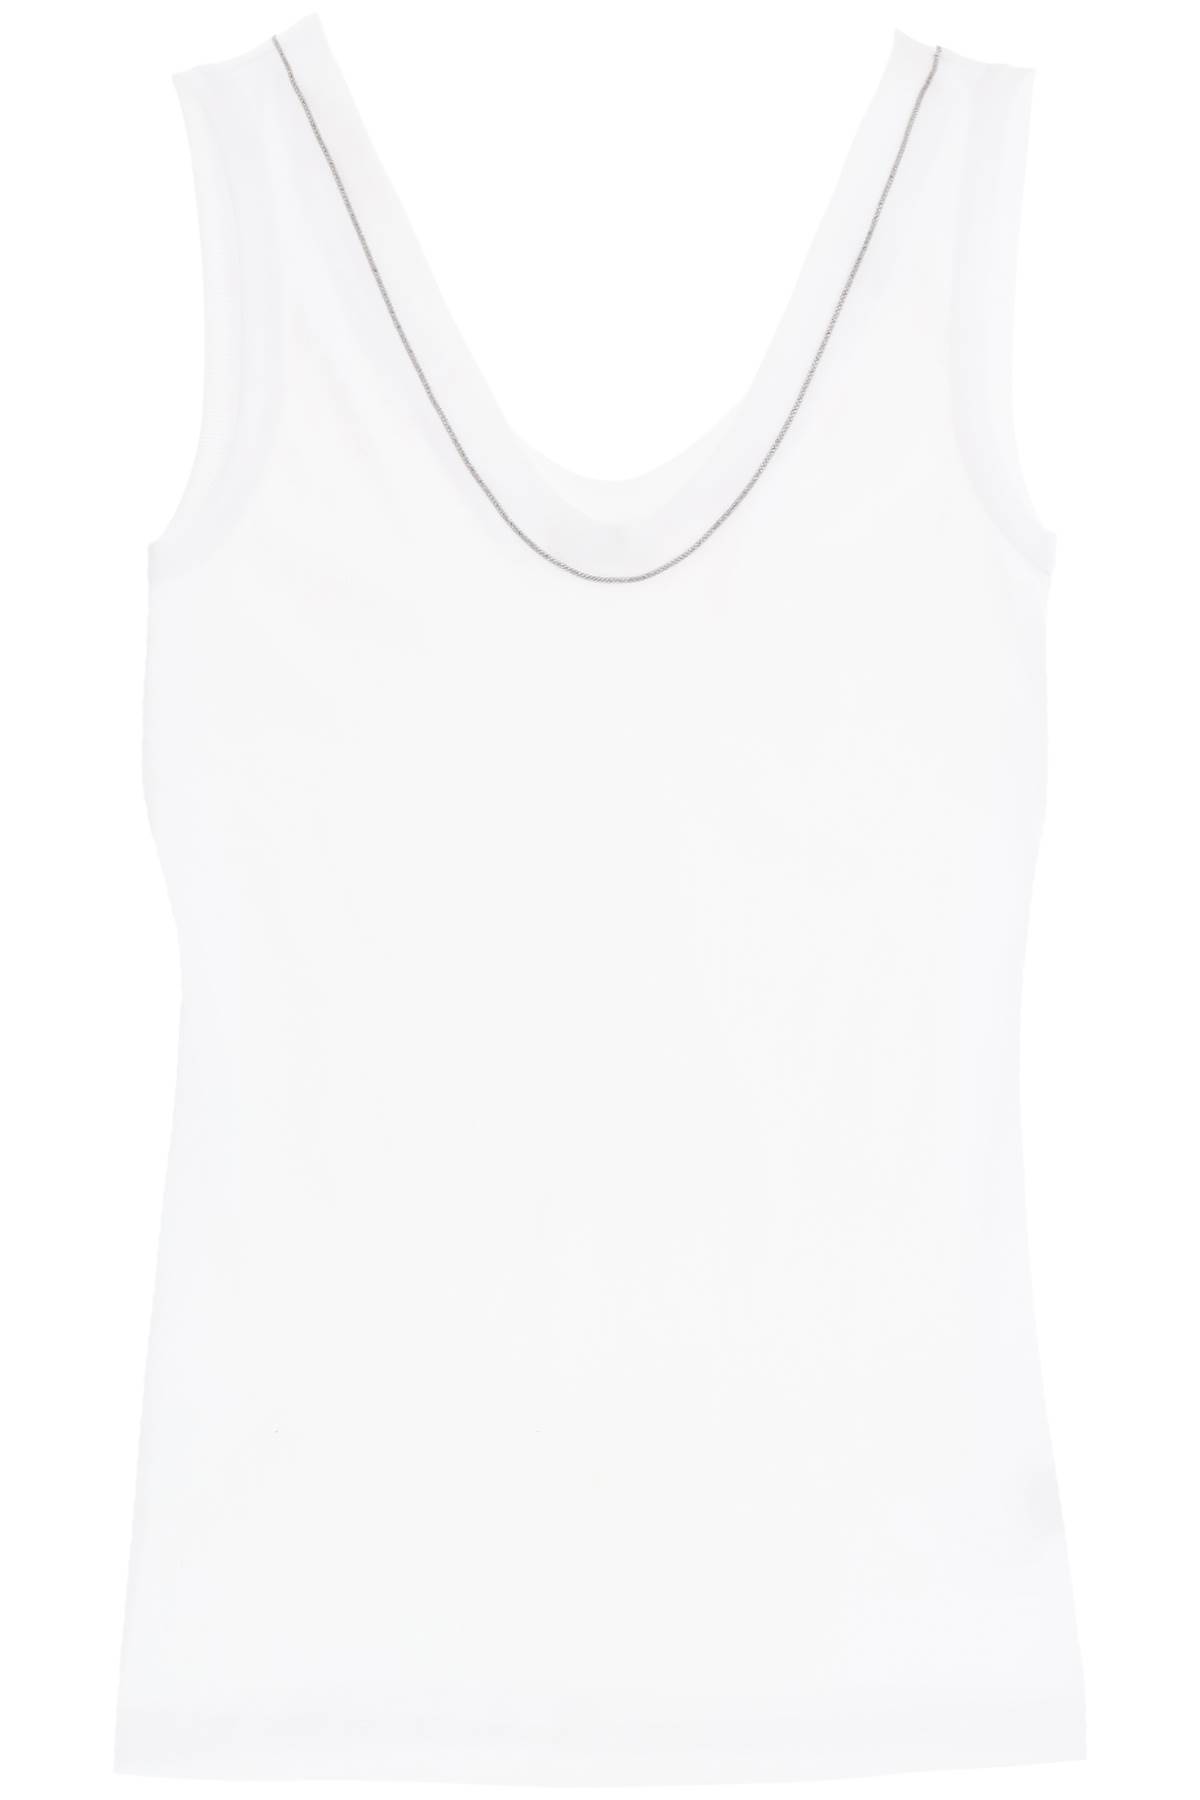 BRUNELLO CUCINELLI RIBBED TANK TOP WITH SHINY COLLAR